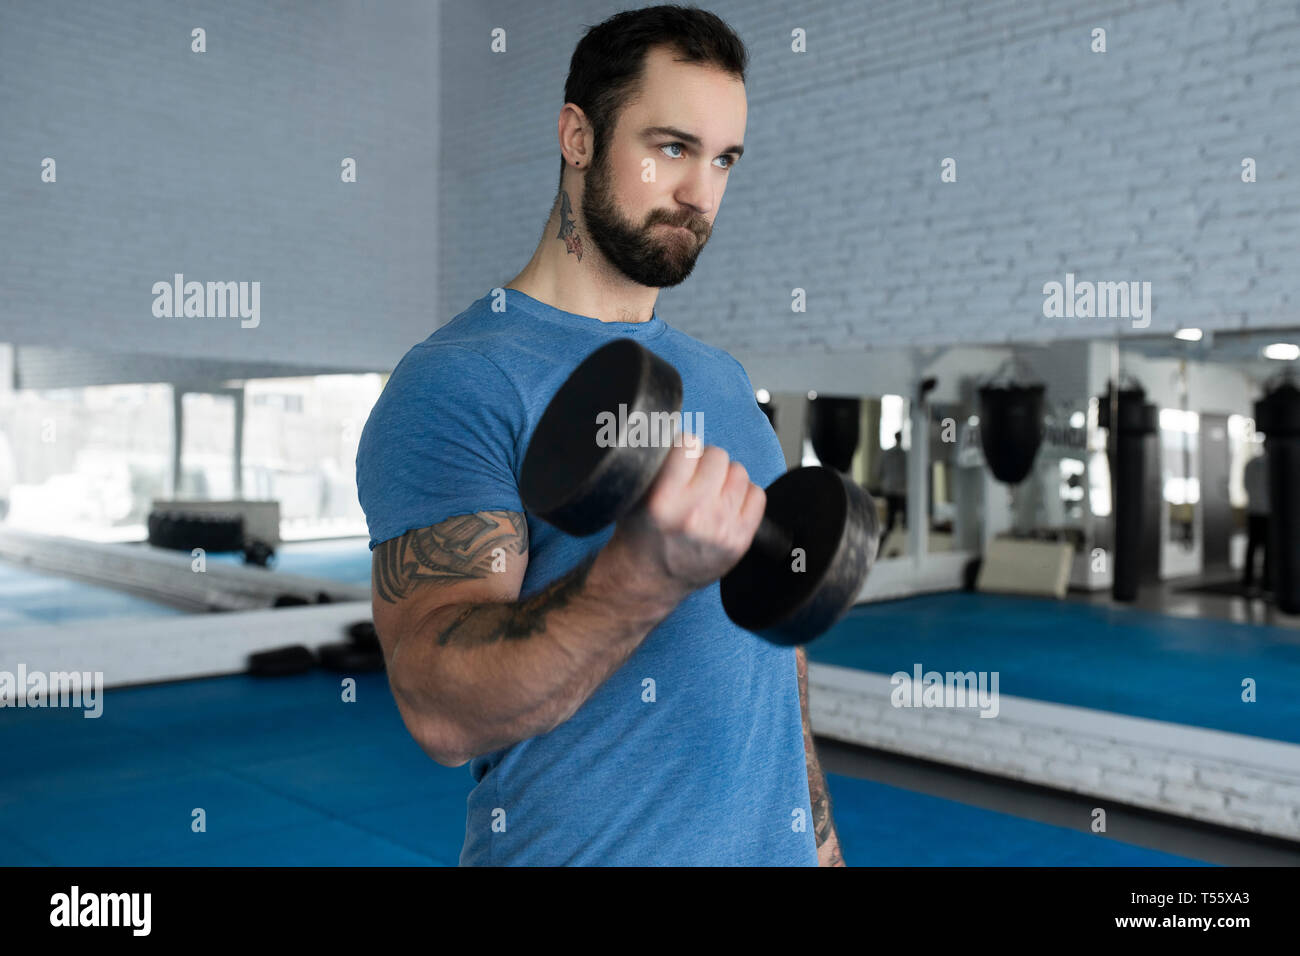 Mid adult man lifting dumbbell in gym Stock Photo